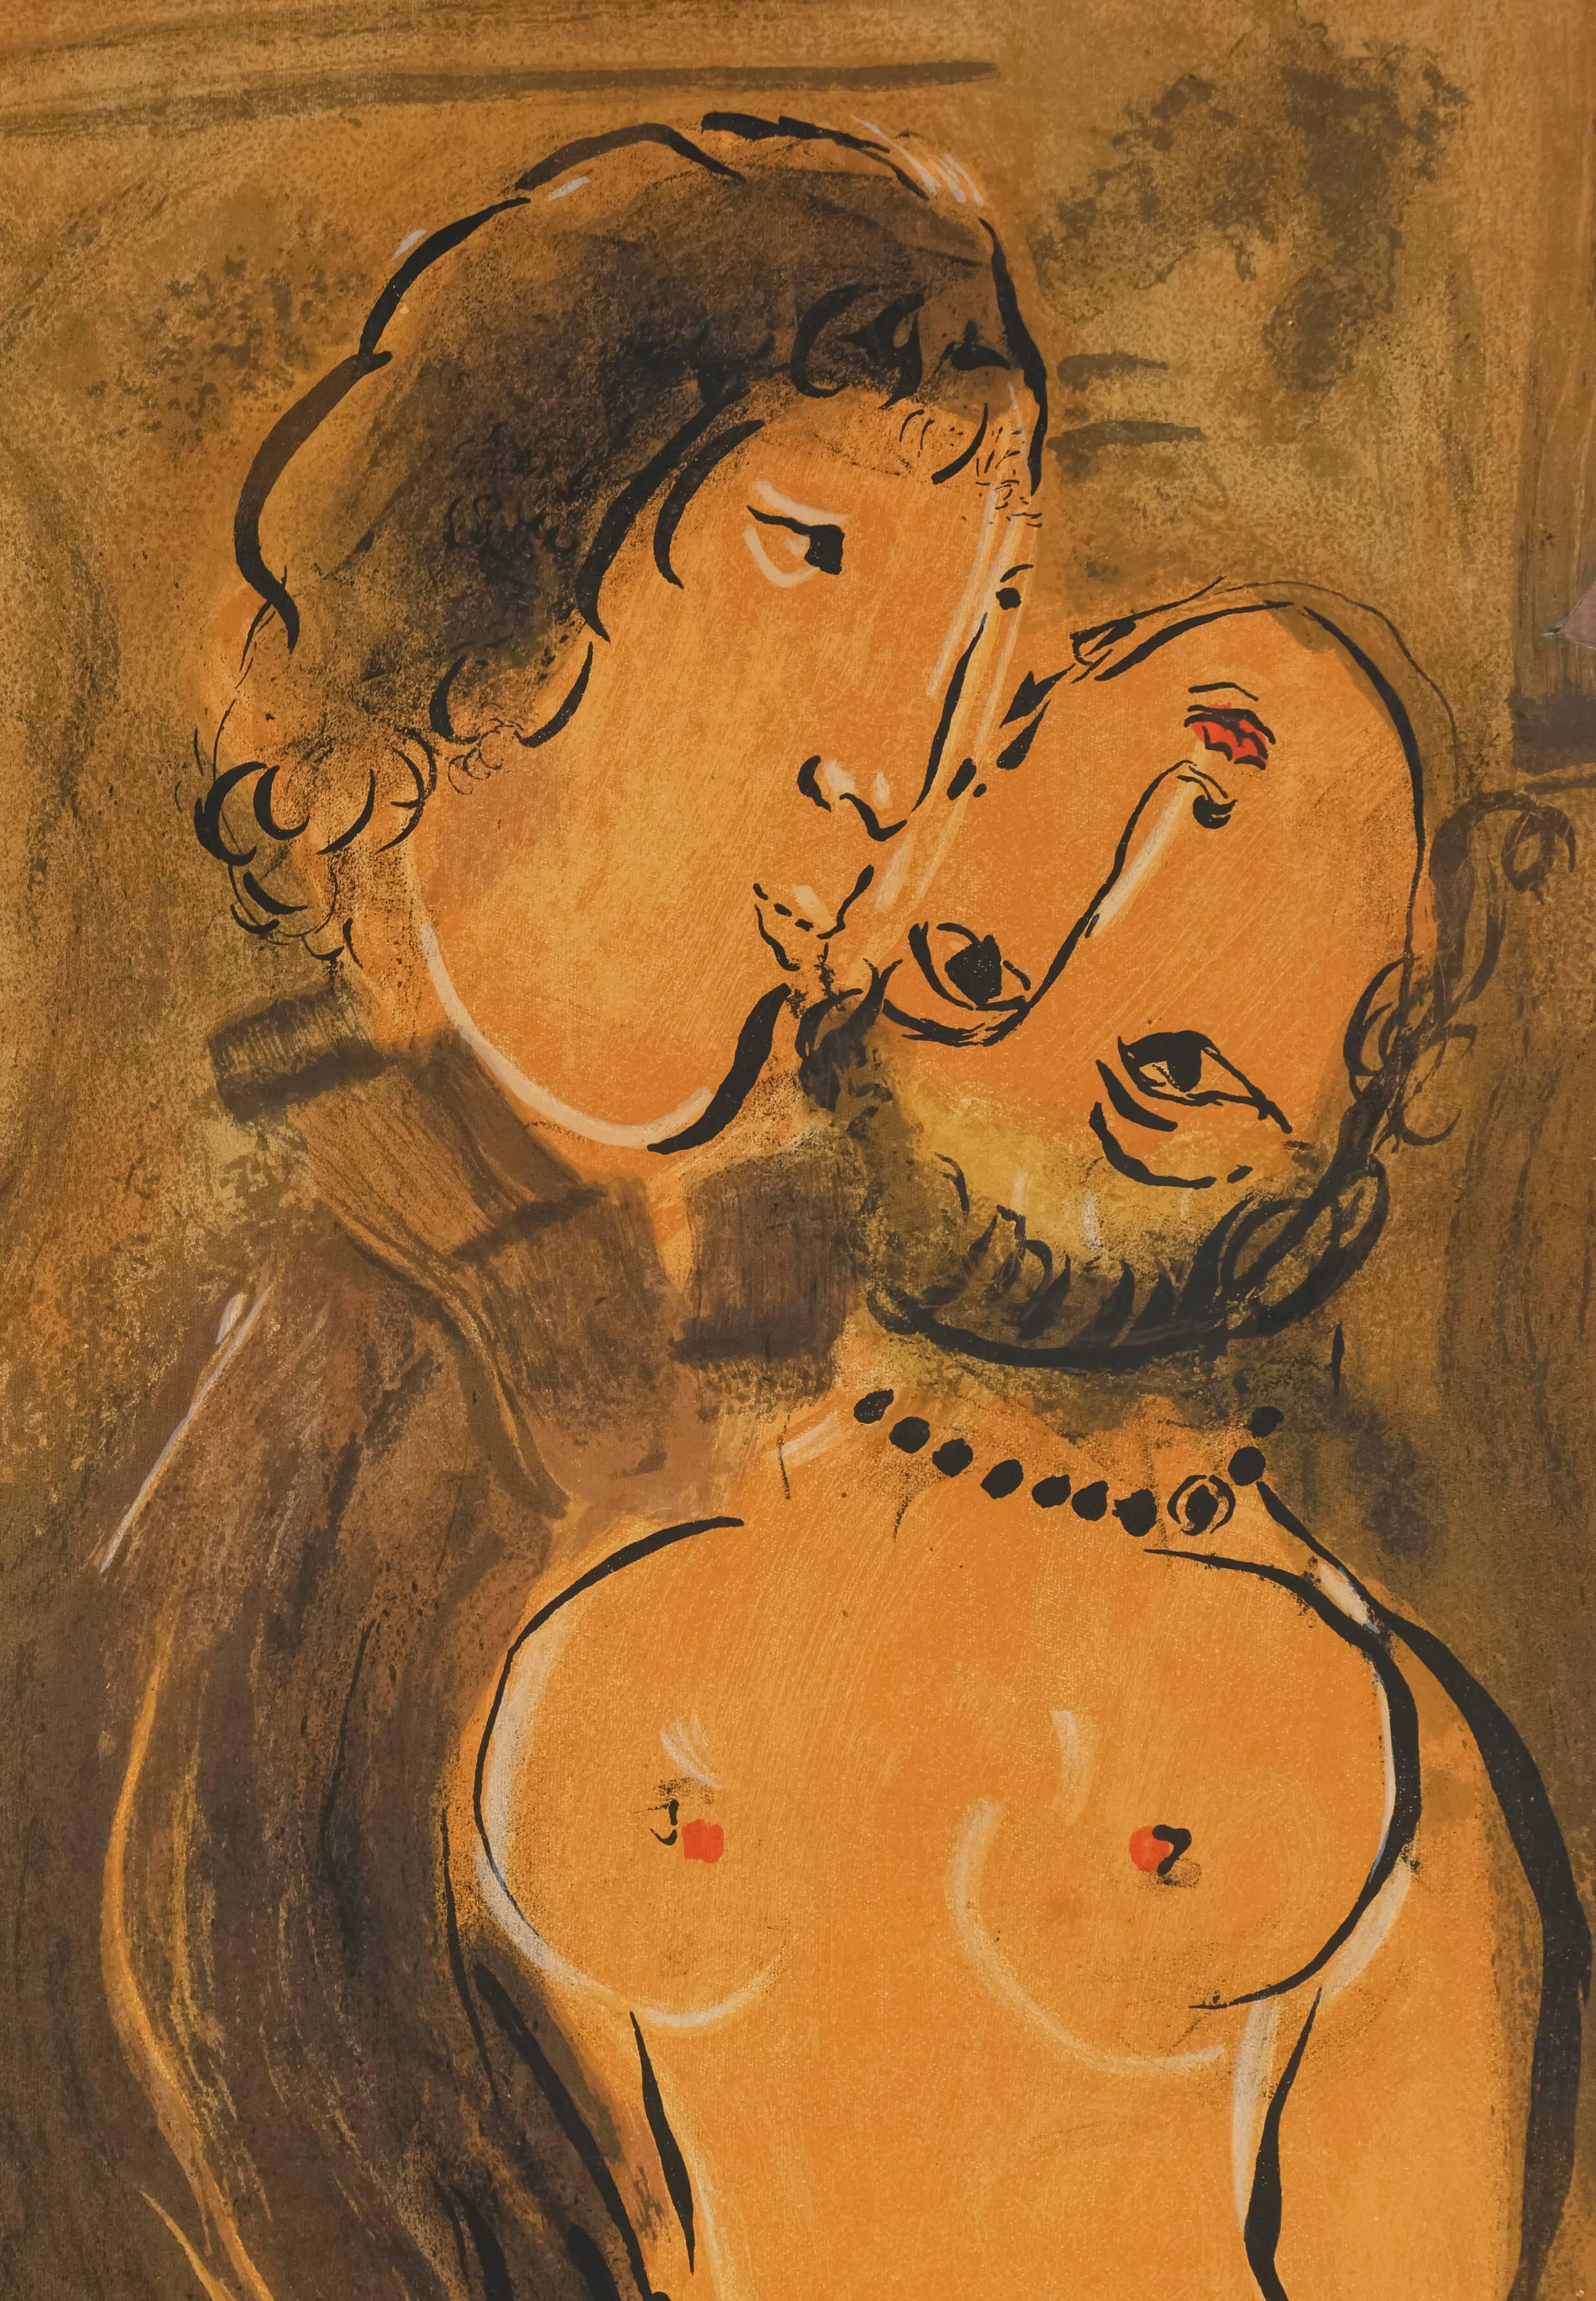 Galerie Maeght (Couple en Ocre), 1952, Lithographieplakat (Moderne), Print, von Marc Chagall